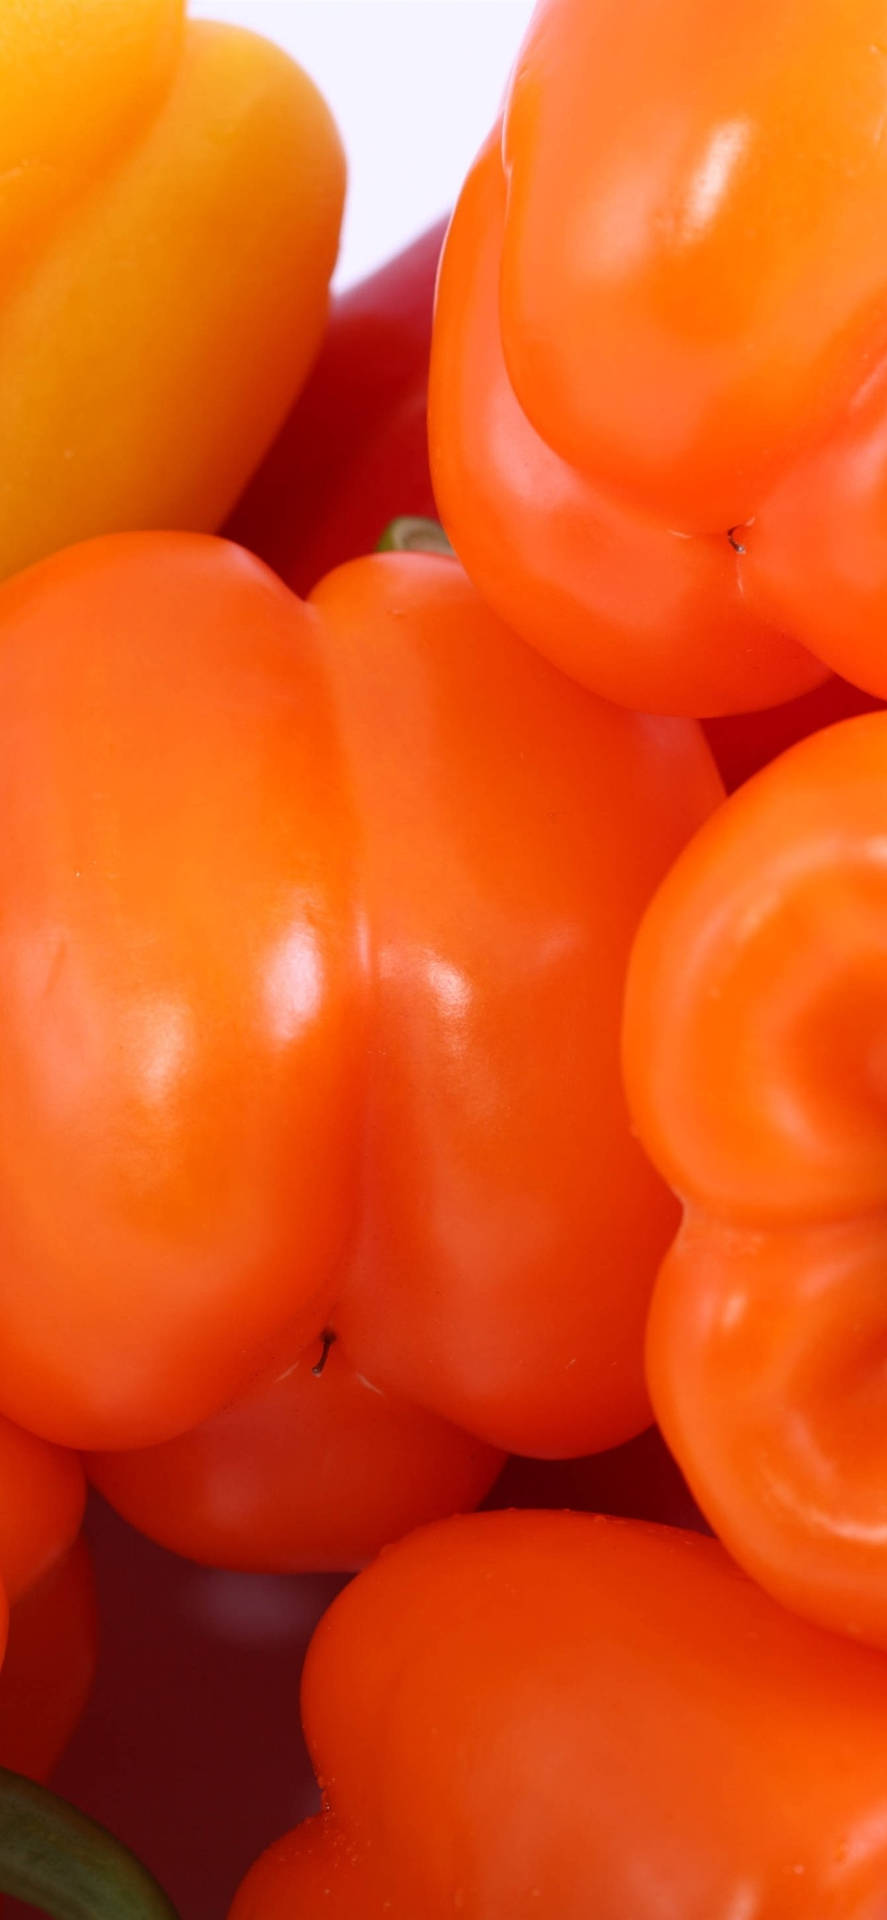 Smooth Orange Bell Peppers Background